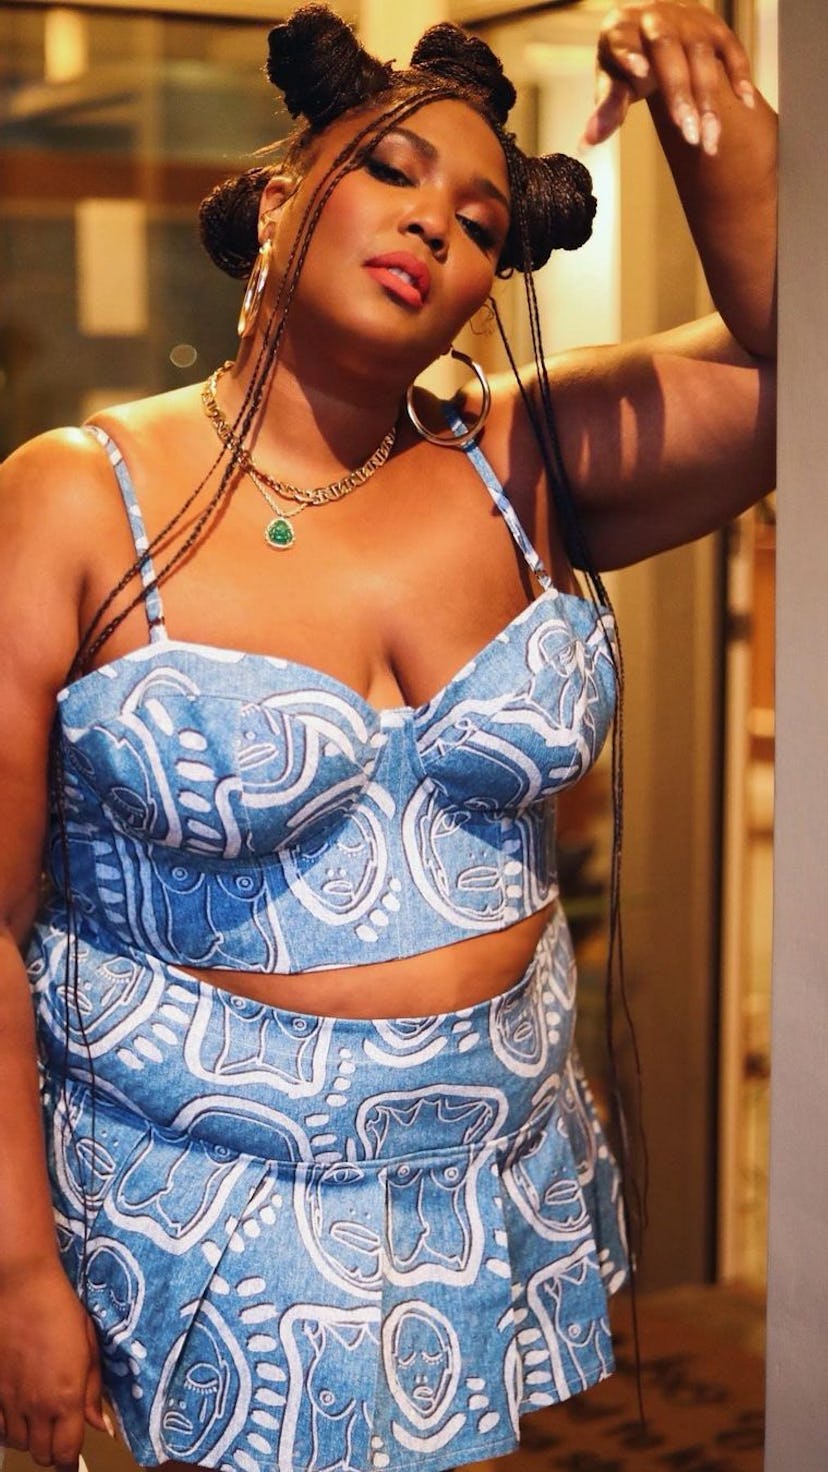 Lizzo is one of the Best Dressed Celebrities this week. Here, she rocks a matching crop top and skir...